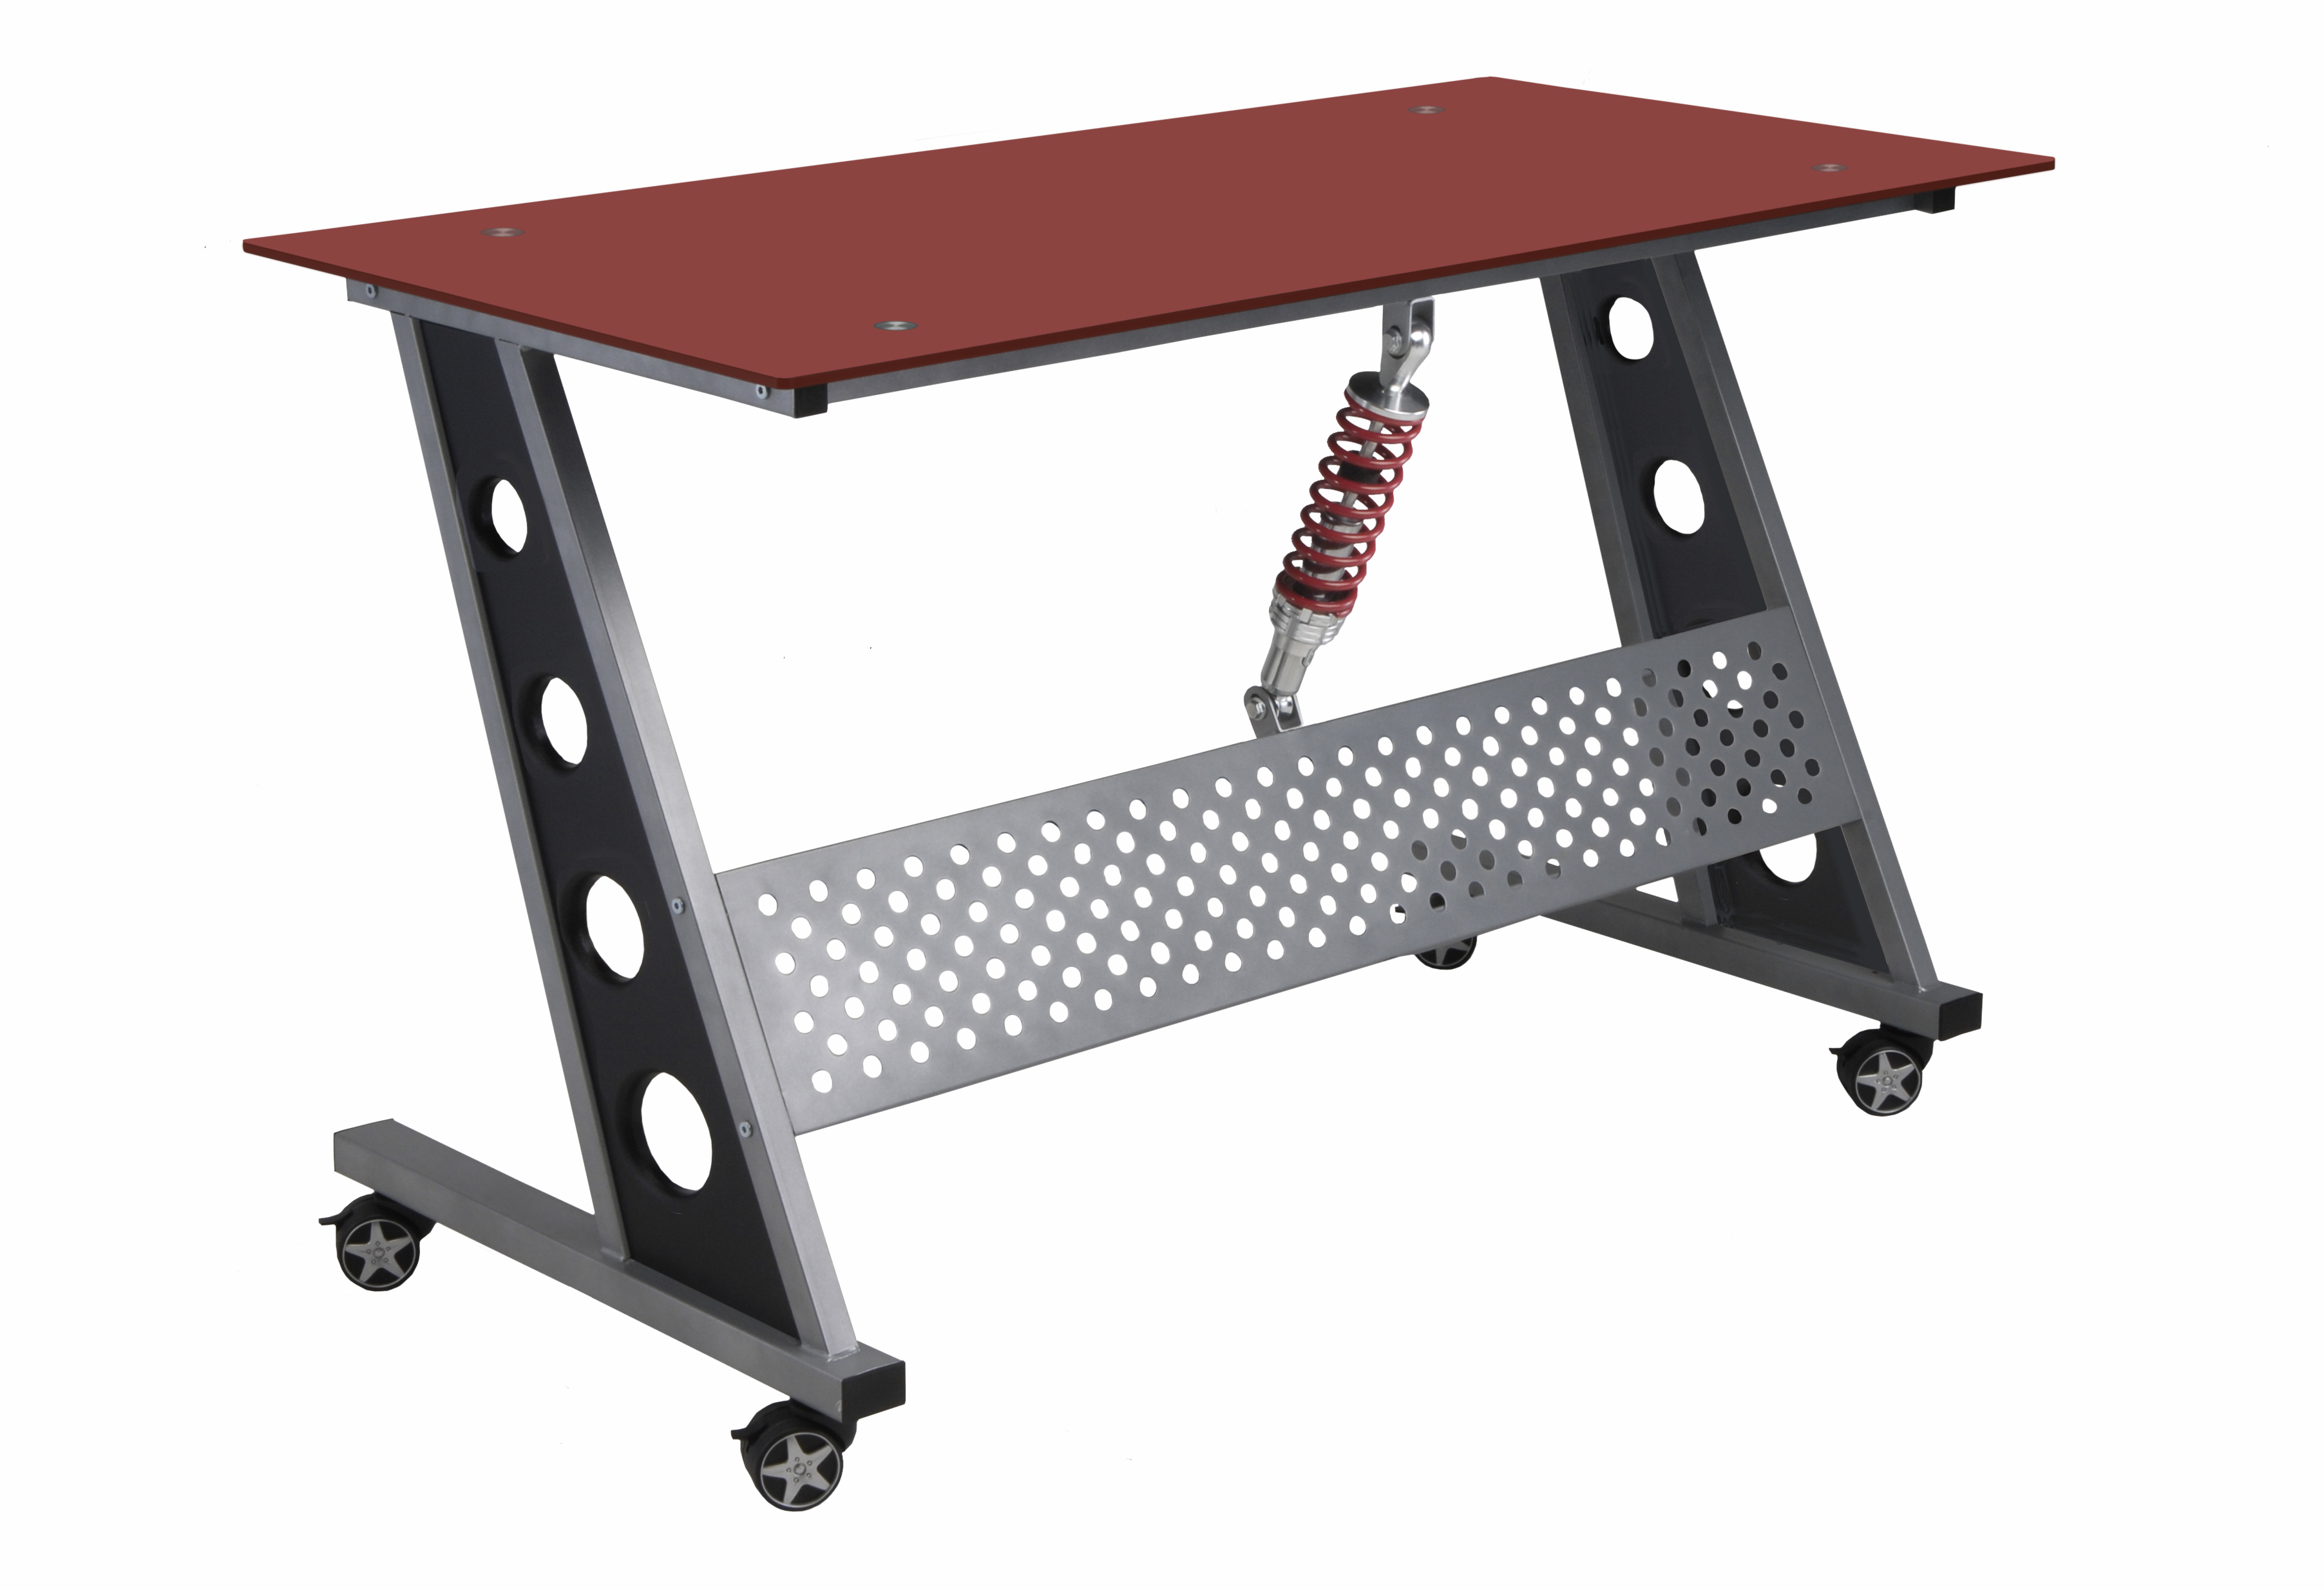 Intro-Tech Automotive, Pitstop Furniture, IND1200R Compact Desk Red, Office Desk